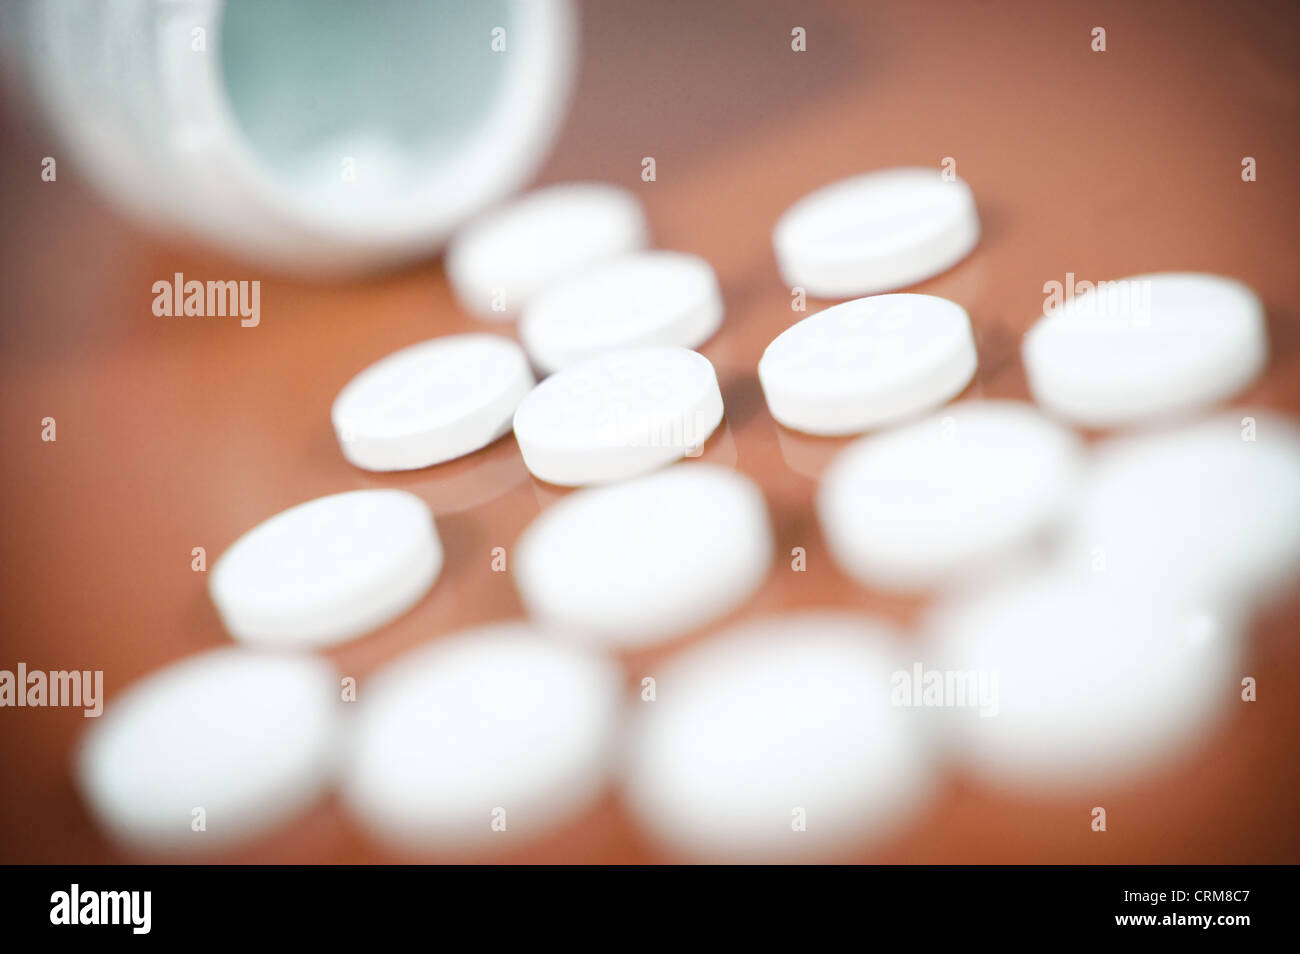 White paracetamol tablets spilling from a bottle against a brown background. Stock Photo